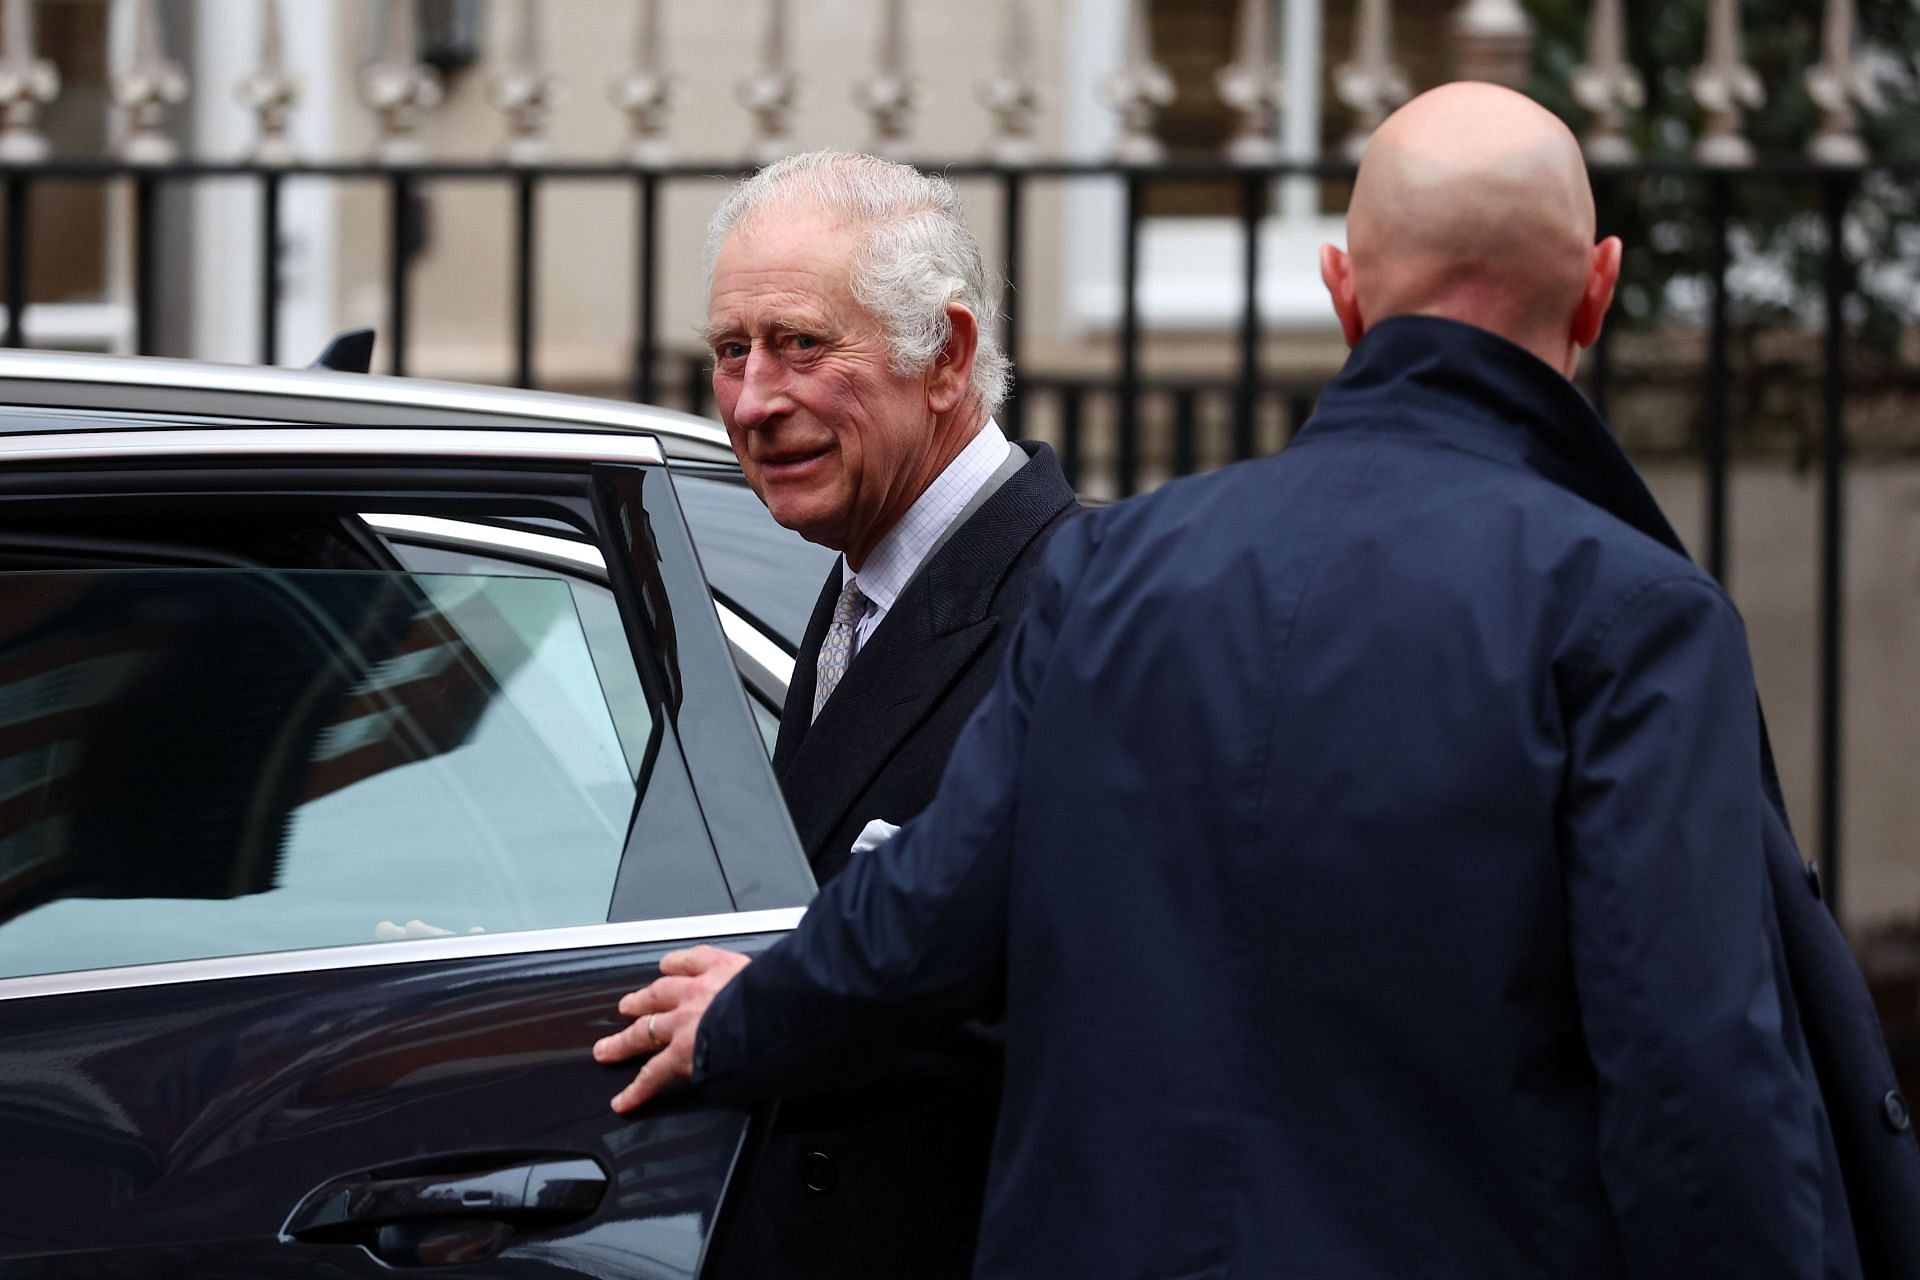 King Charles III leaves hospital after treatment for enlarged prostate